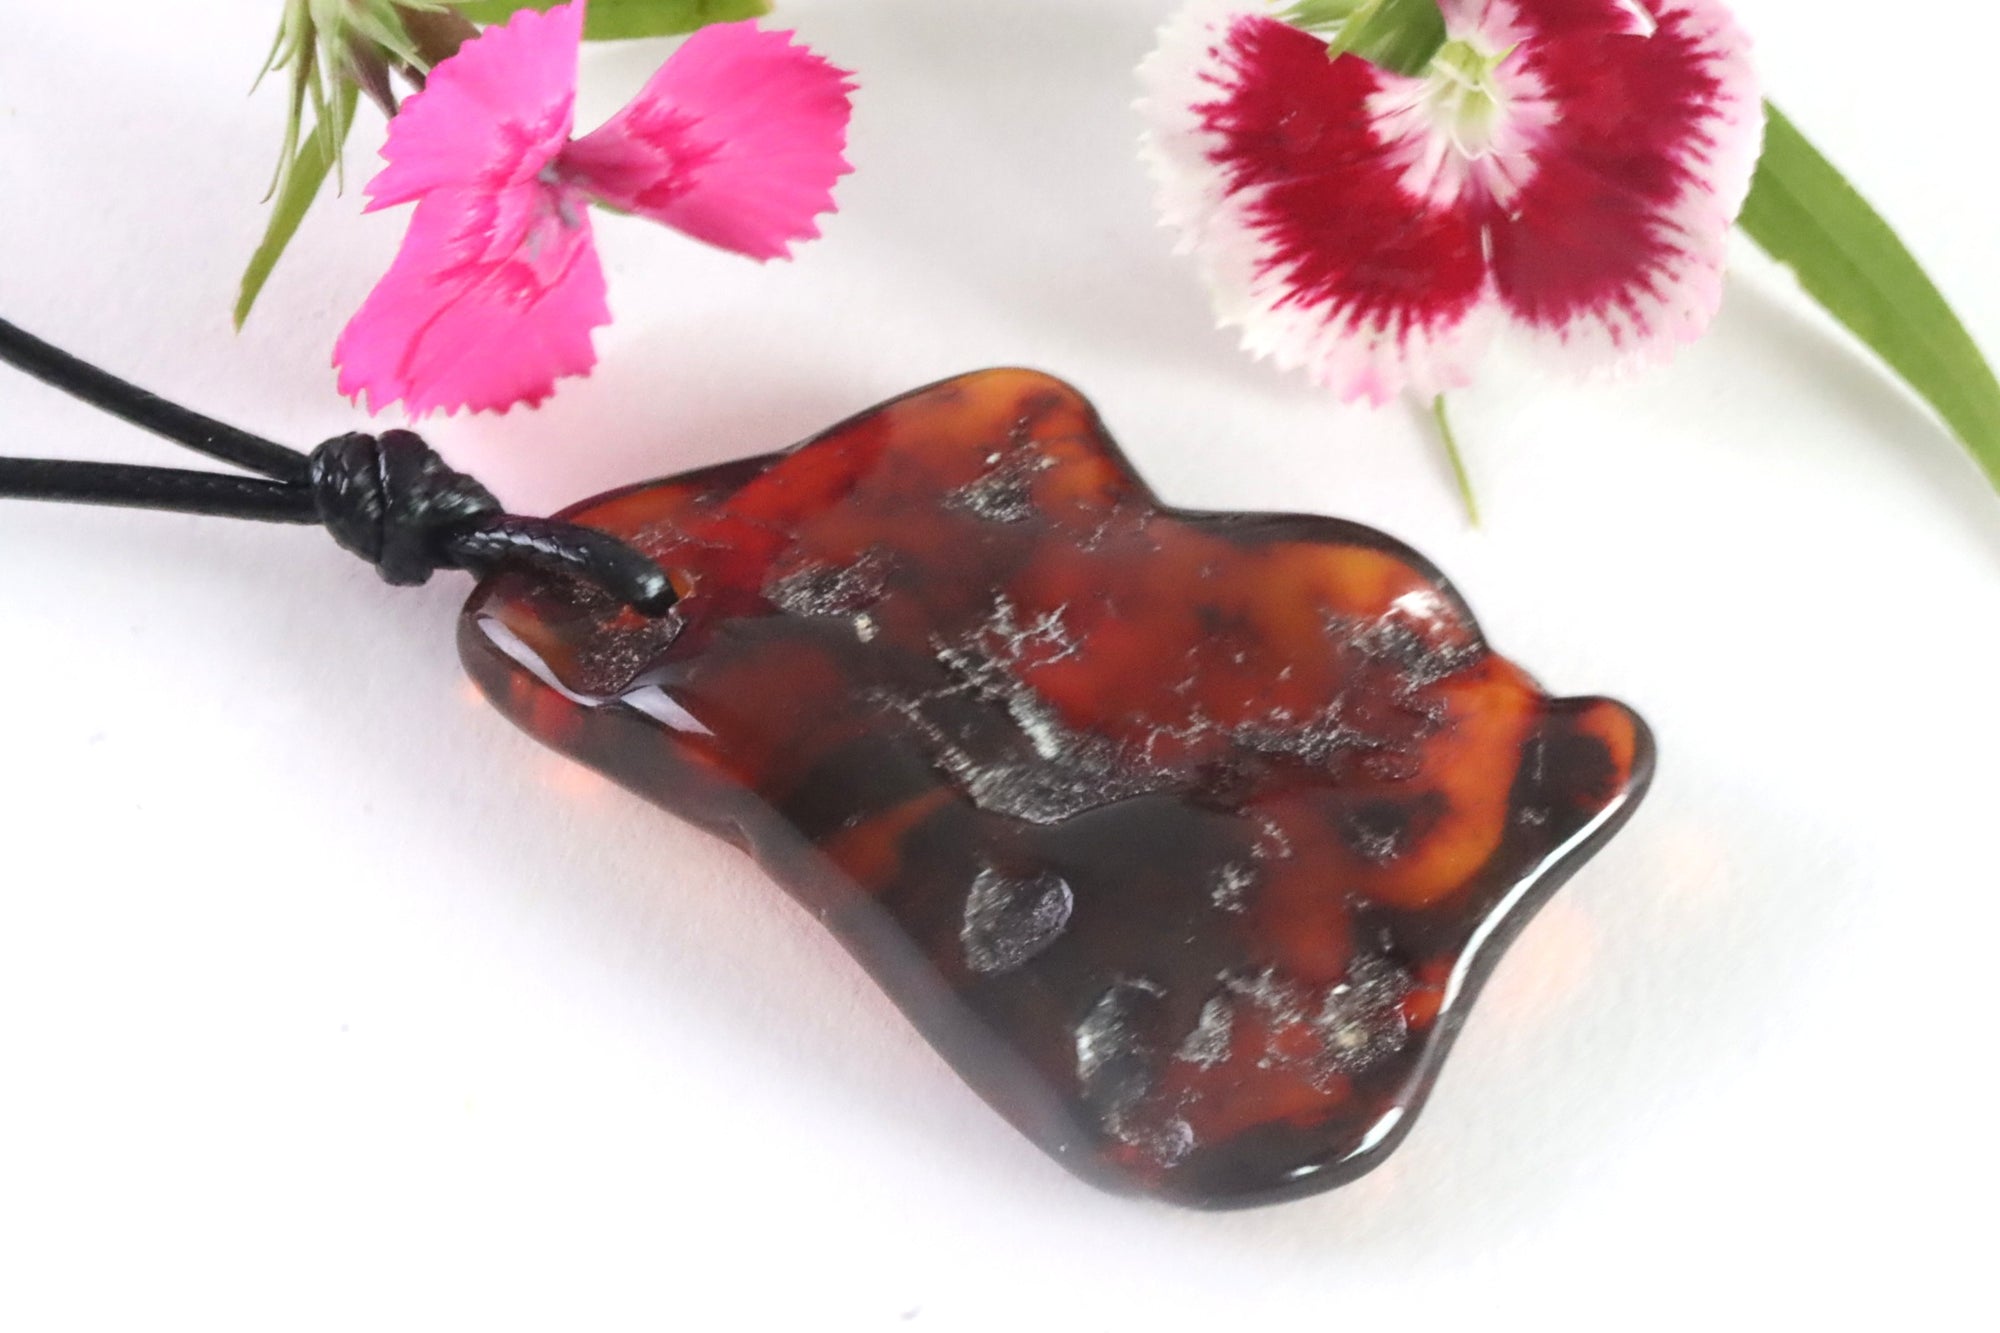 Natural Amber Amulet Pendant for Anxiety